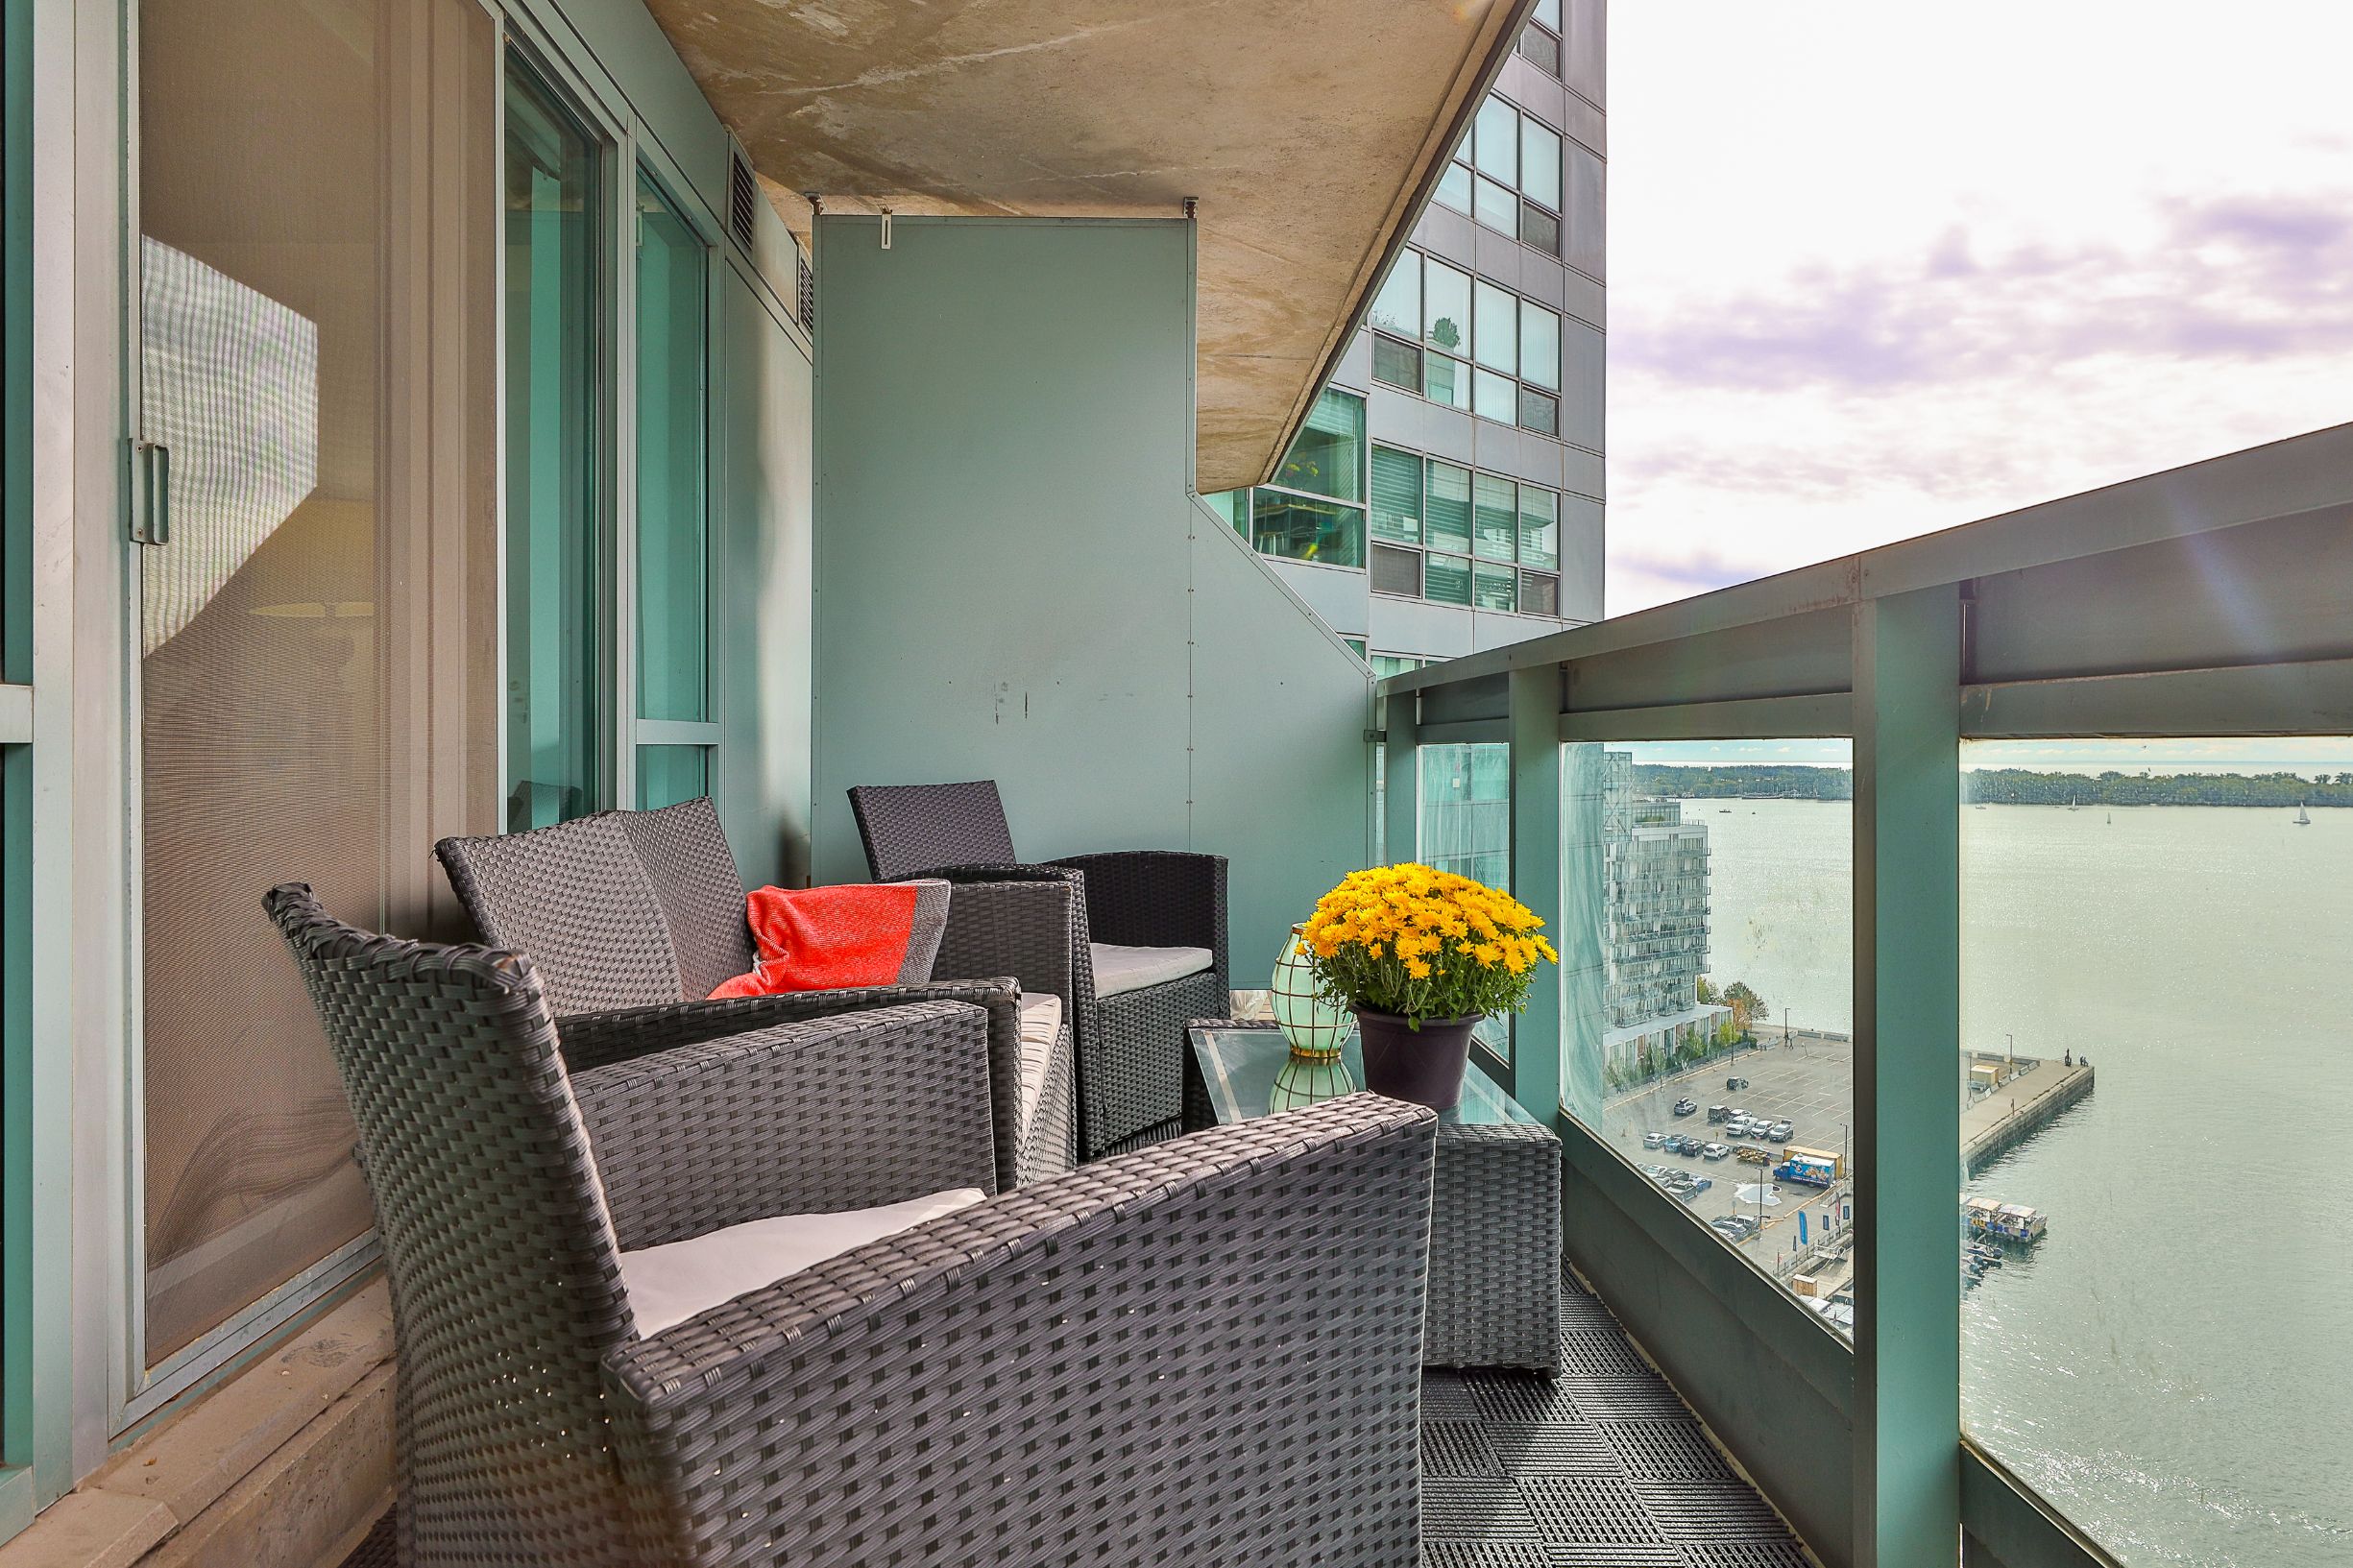 Sold: Massive 1+1 Bedroom Condo With A View (10 Yonge St #1901)